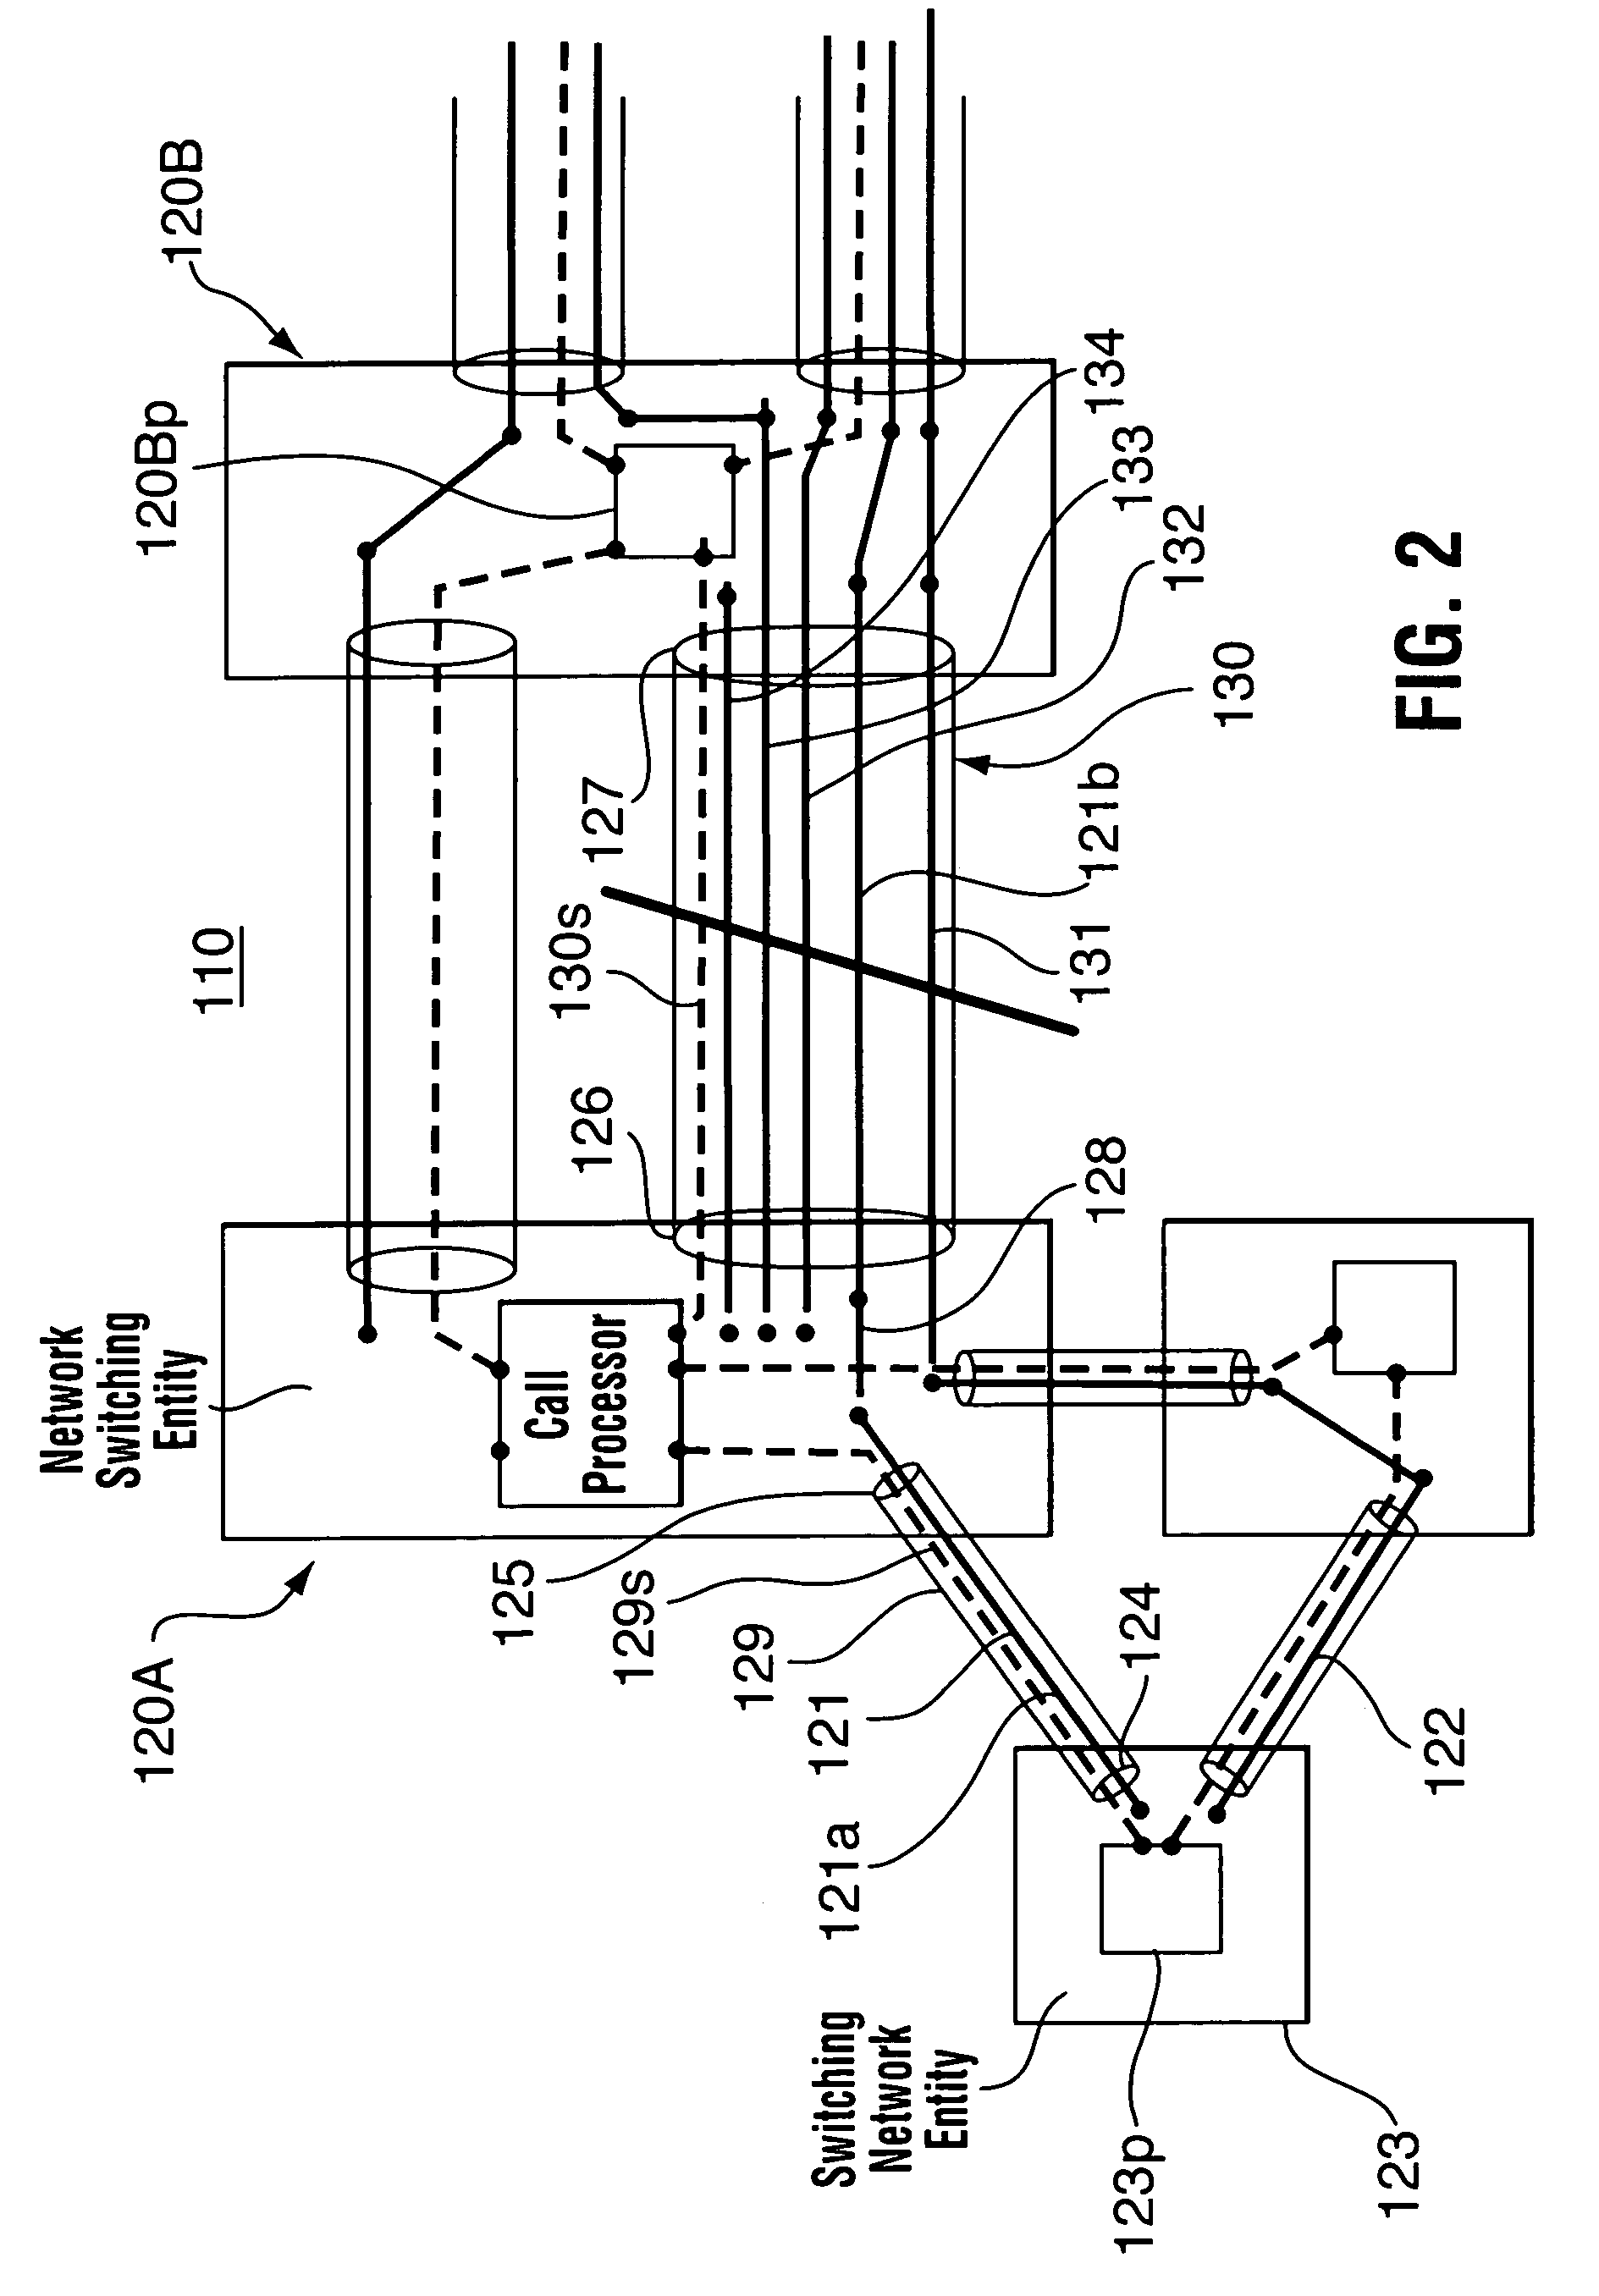 Method and apparatus for prioritized release of connections in a communications network